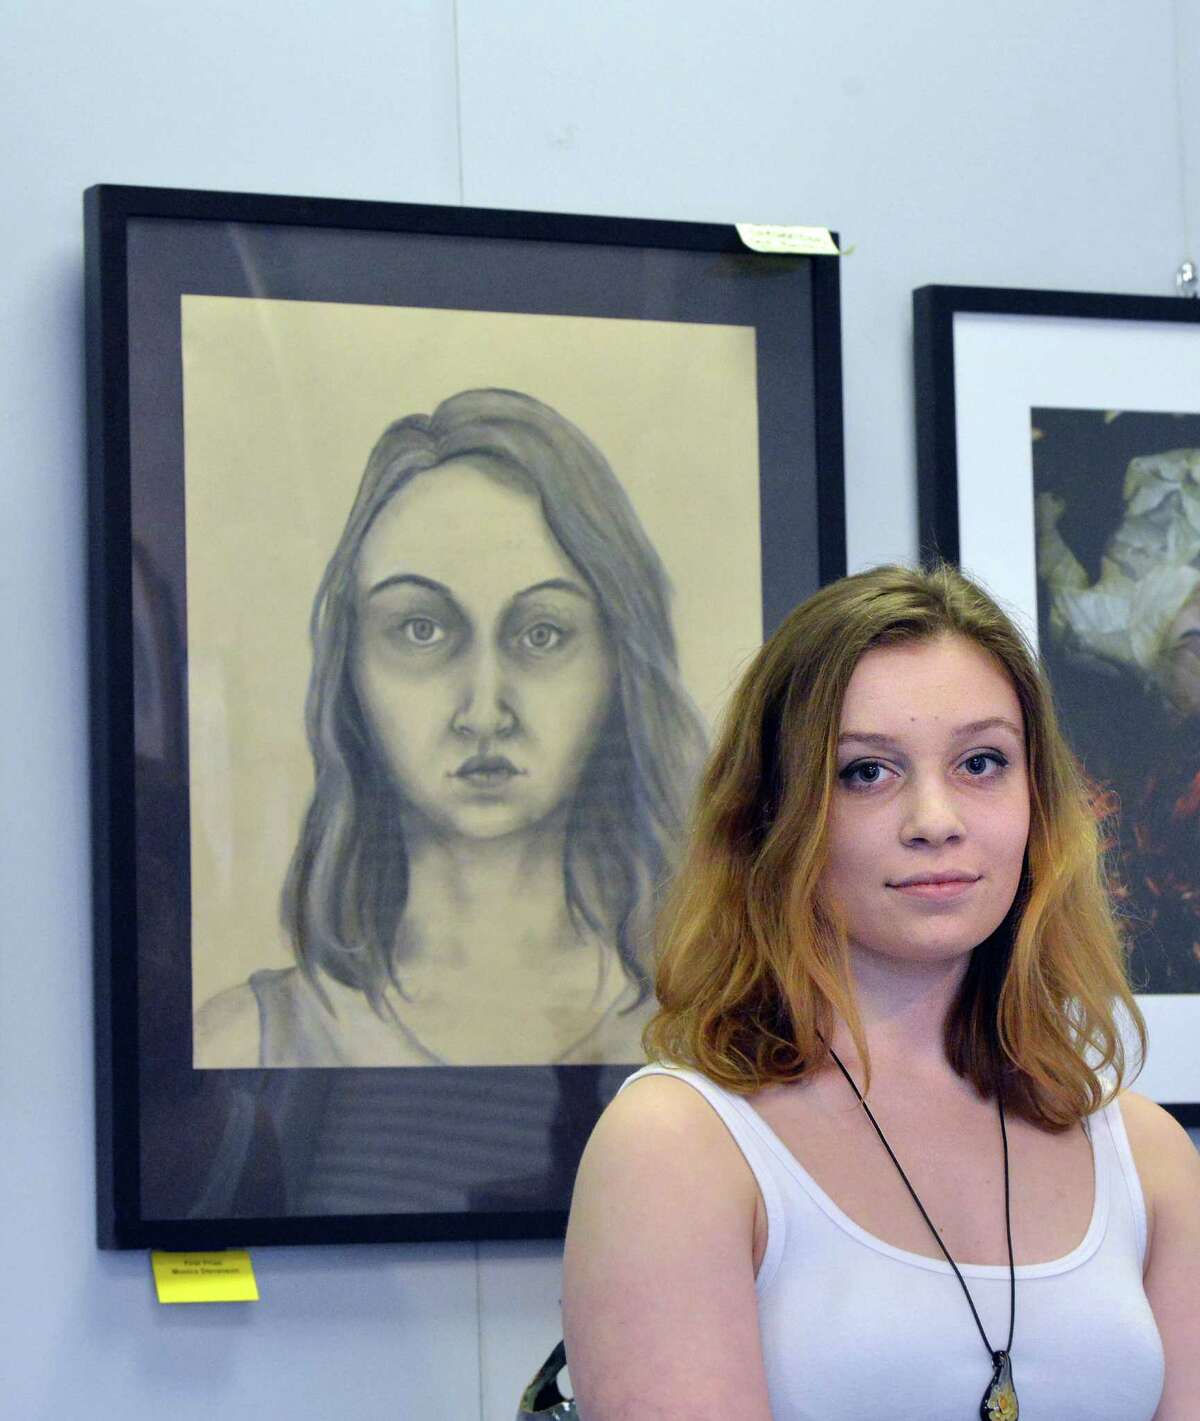 Greenwich High School senior Monica Stevenson,18, with her self-portrait done in charcoal that was part of the Art Society of Old Greenwich Spring Art Show at the Garden Education Center in Cos Cob, Friday night, April 8, 2016. Stevenson was one of three GHS student scholarship award winners along with Estella Perrone for surrealistic photography and Andreas Zervos for ceramics. Barbara Stretton of the Art Society of Old Greenwich said there are about 35 works in the show and that the show will be available for viewing at the center until April 29th. According to Stretton viewing hours are during the week, Monday to Friday, 9 am to 4 pm.